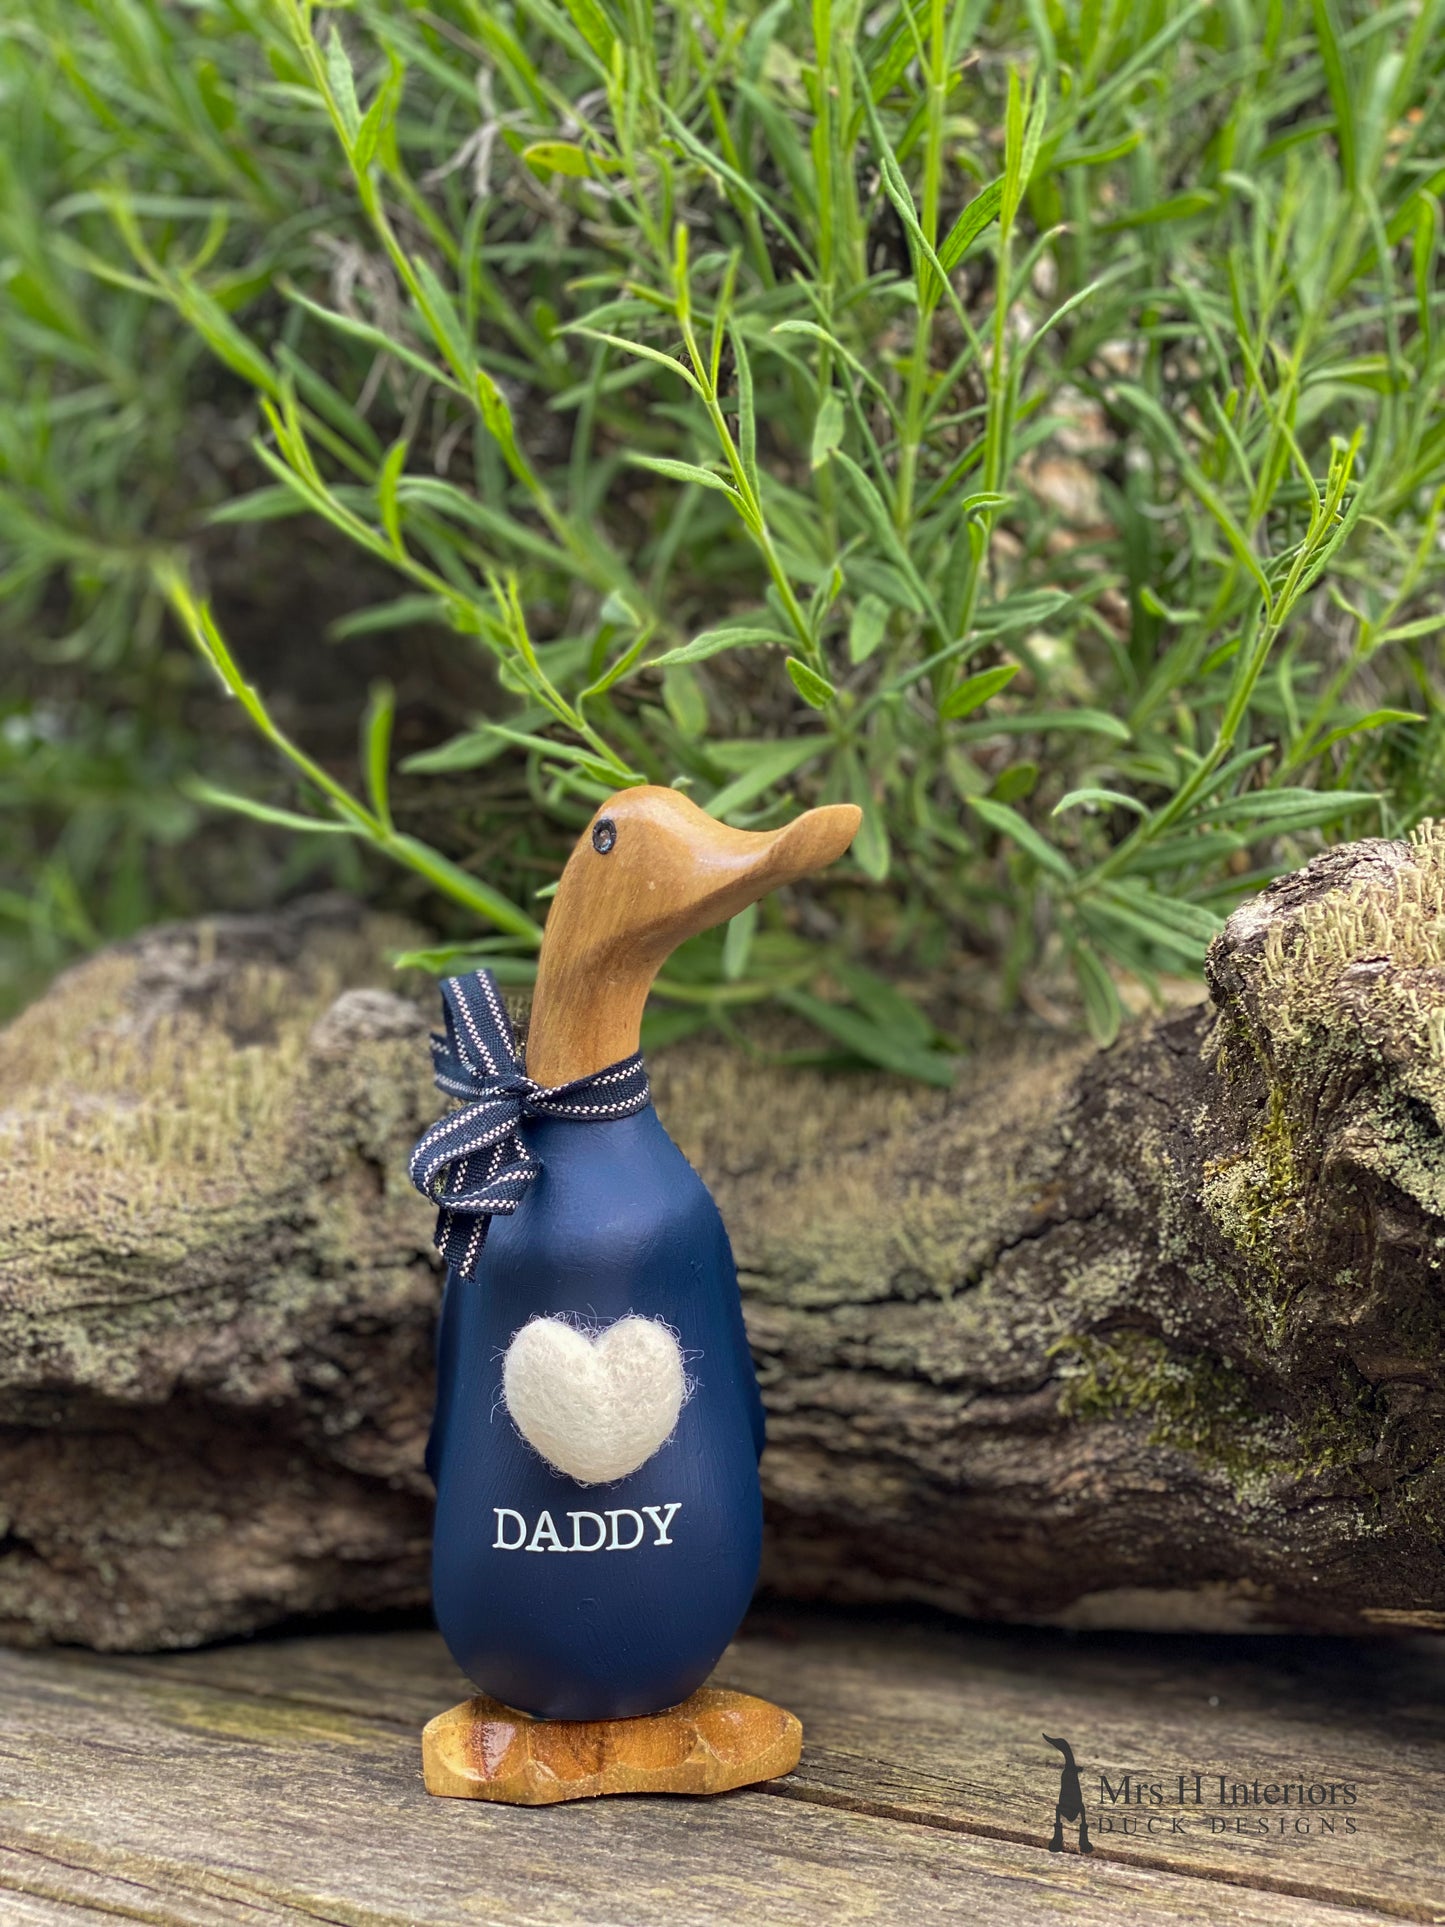 Love Daddy - Decorated Wooden Duck in Boots by Mrs H the Duck Lady